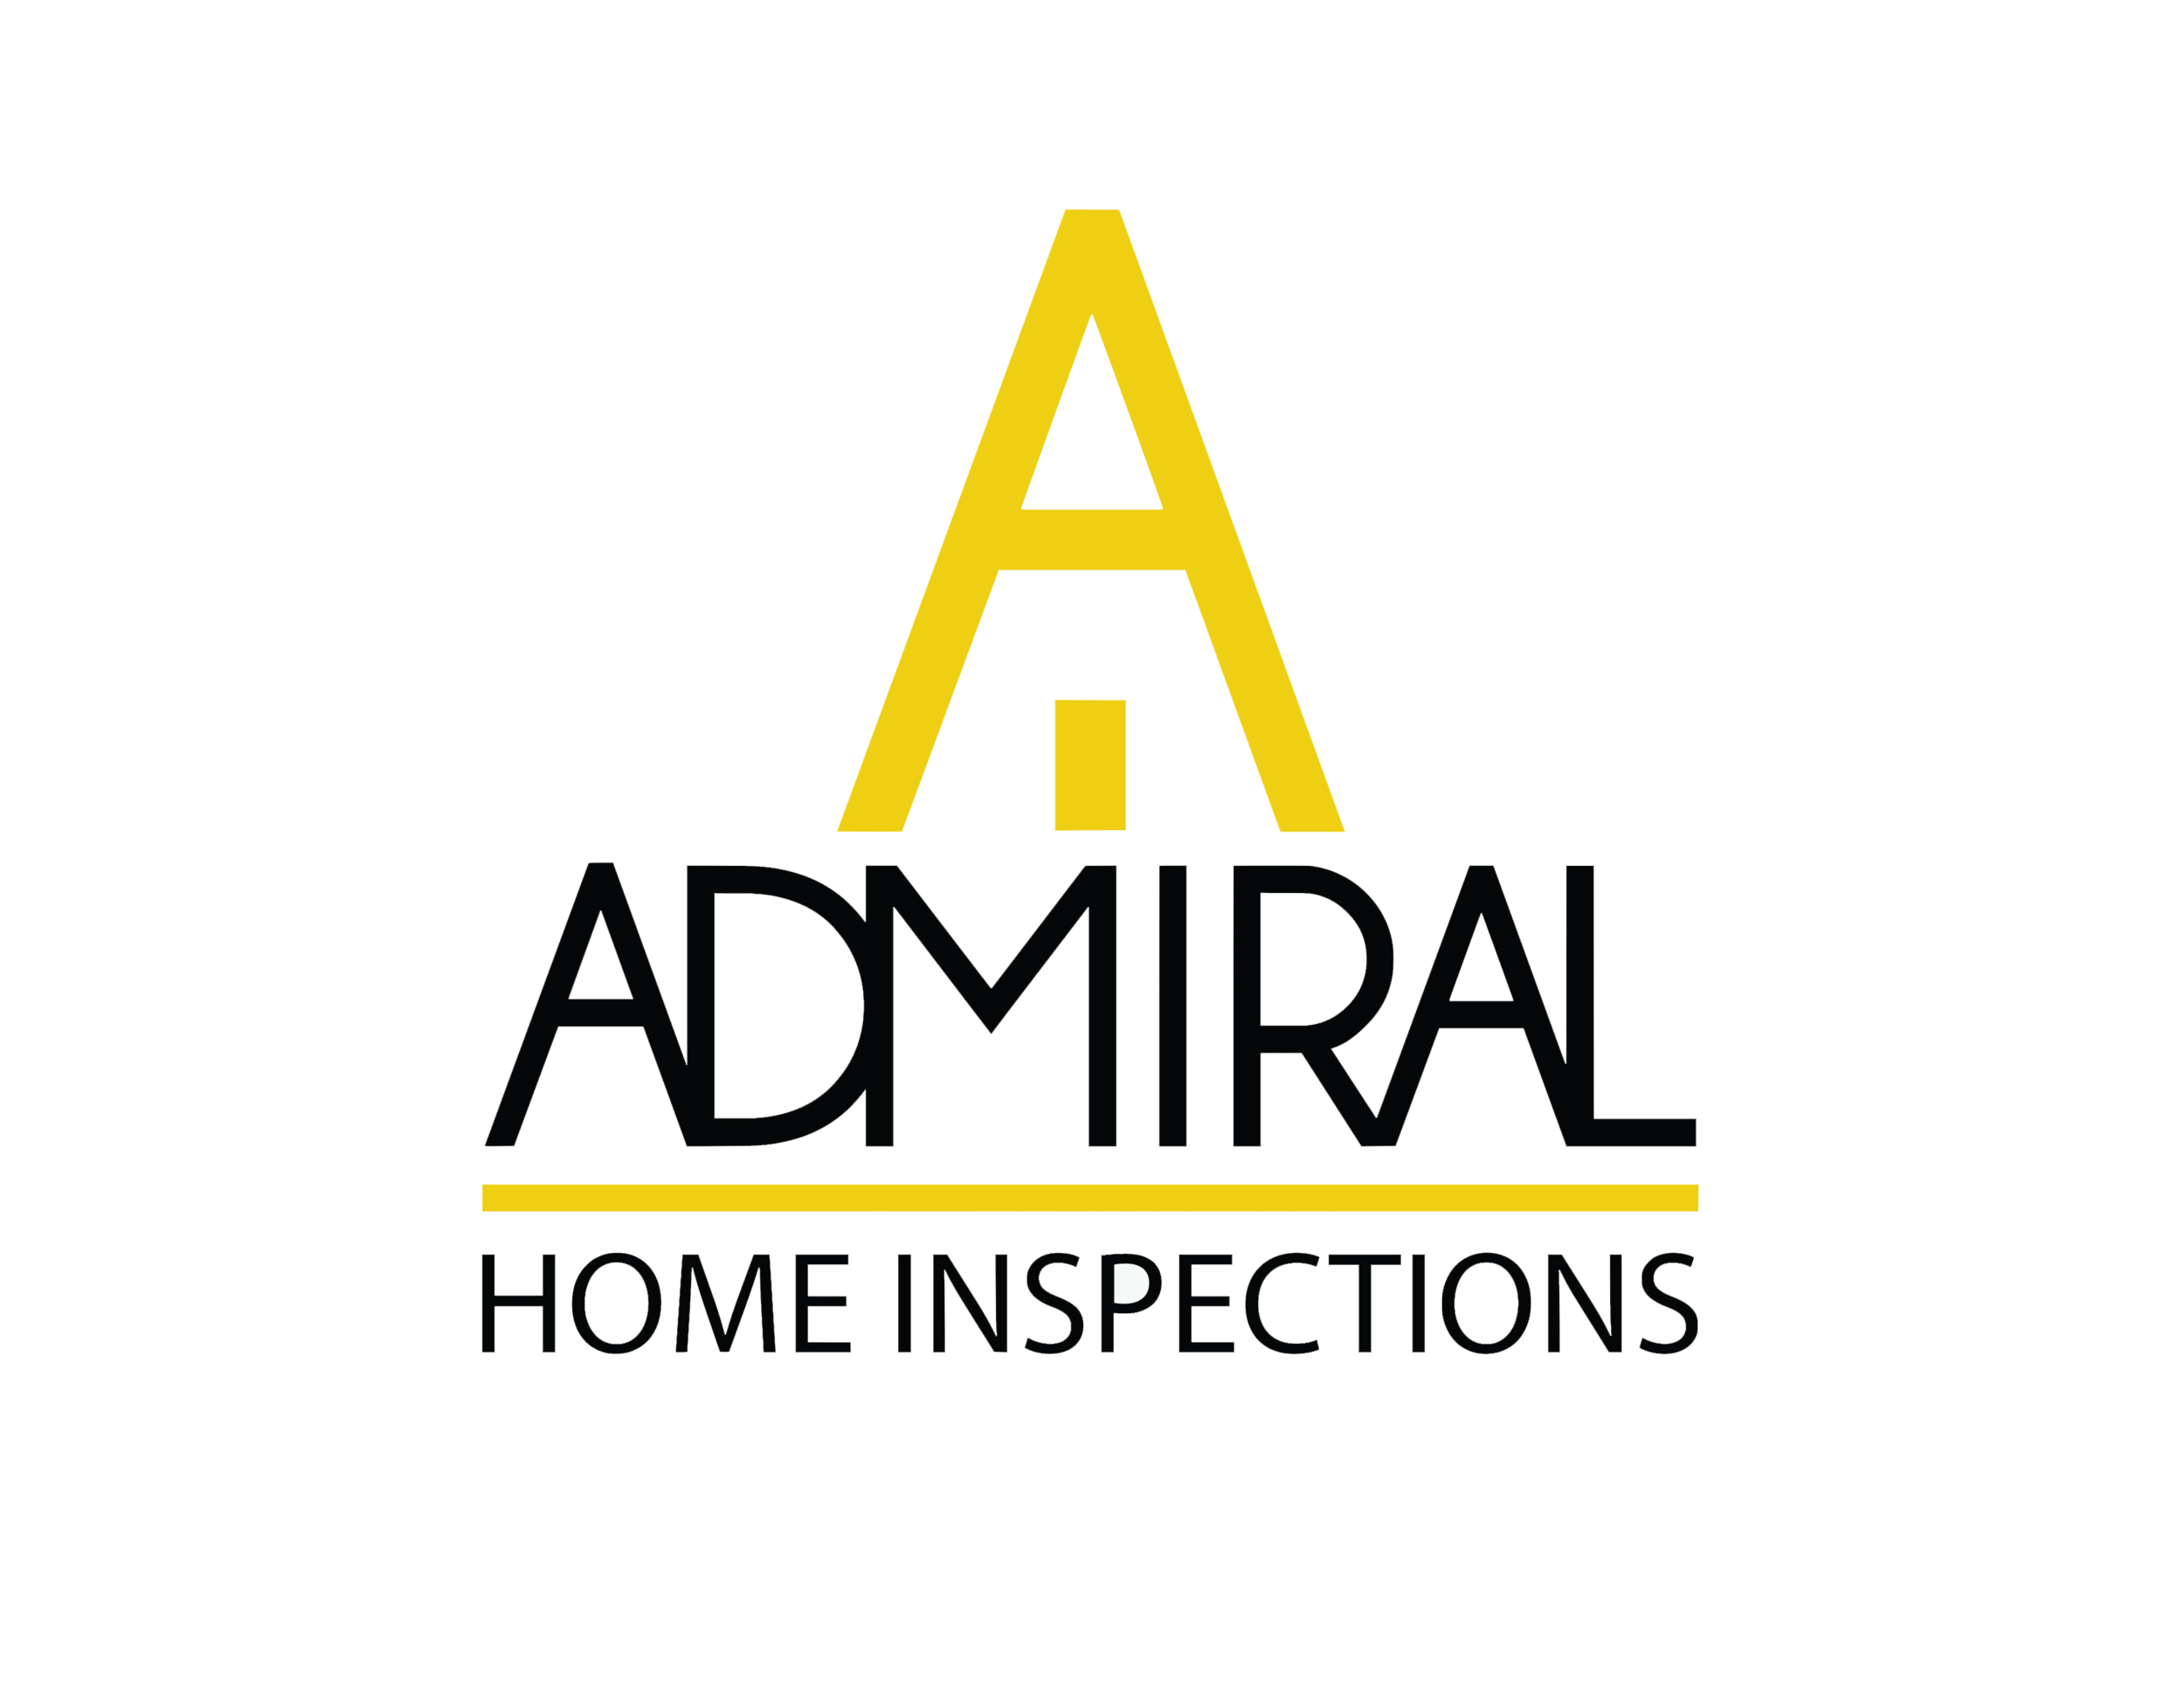 admiral_home_inspections_logo clear.png